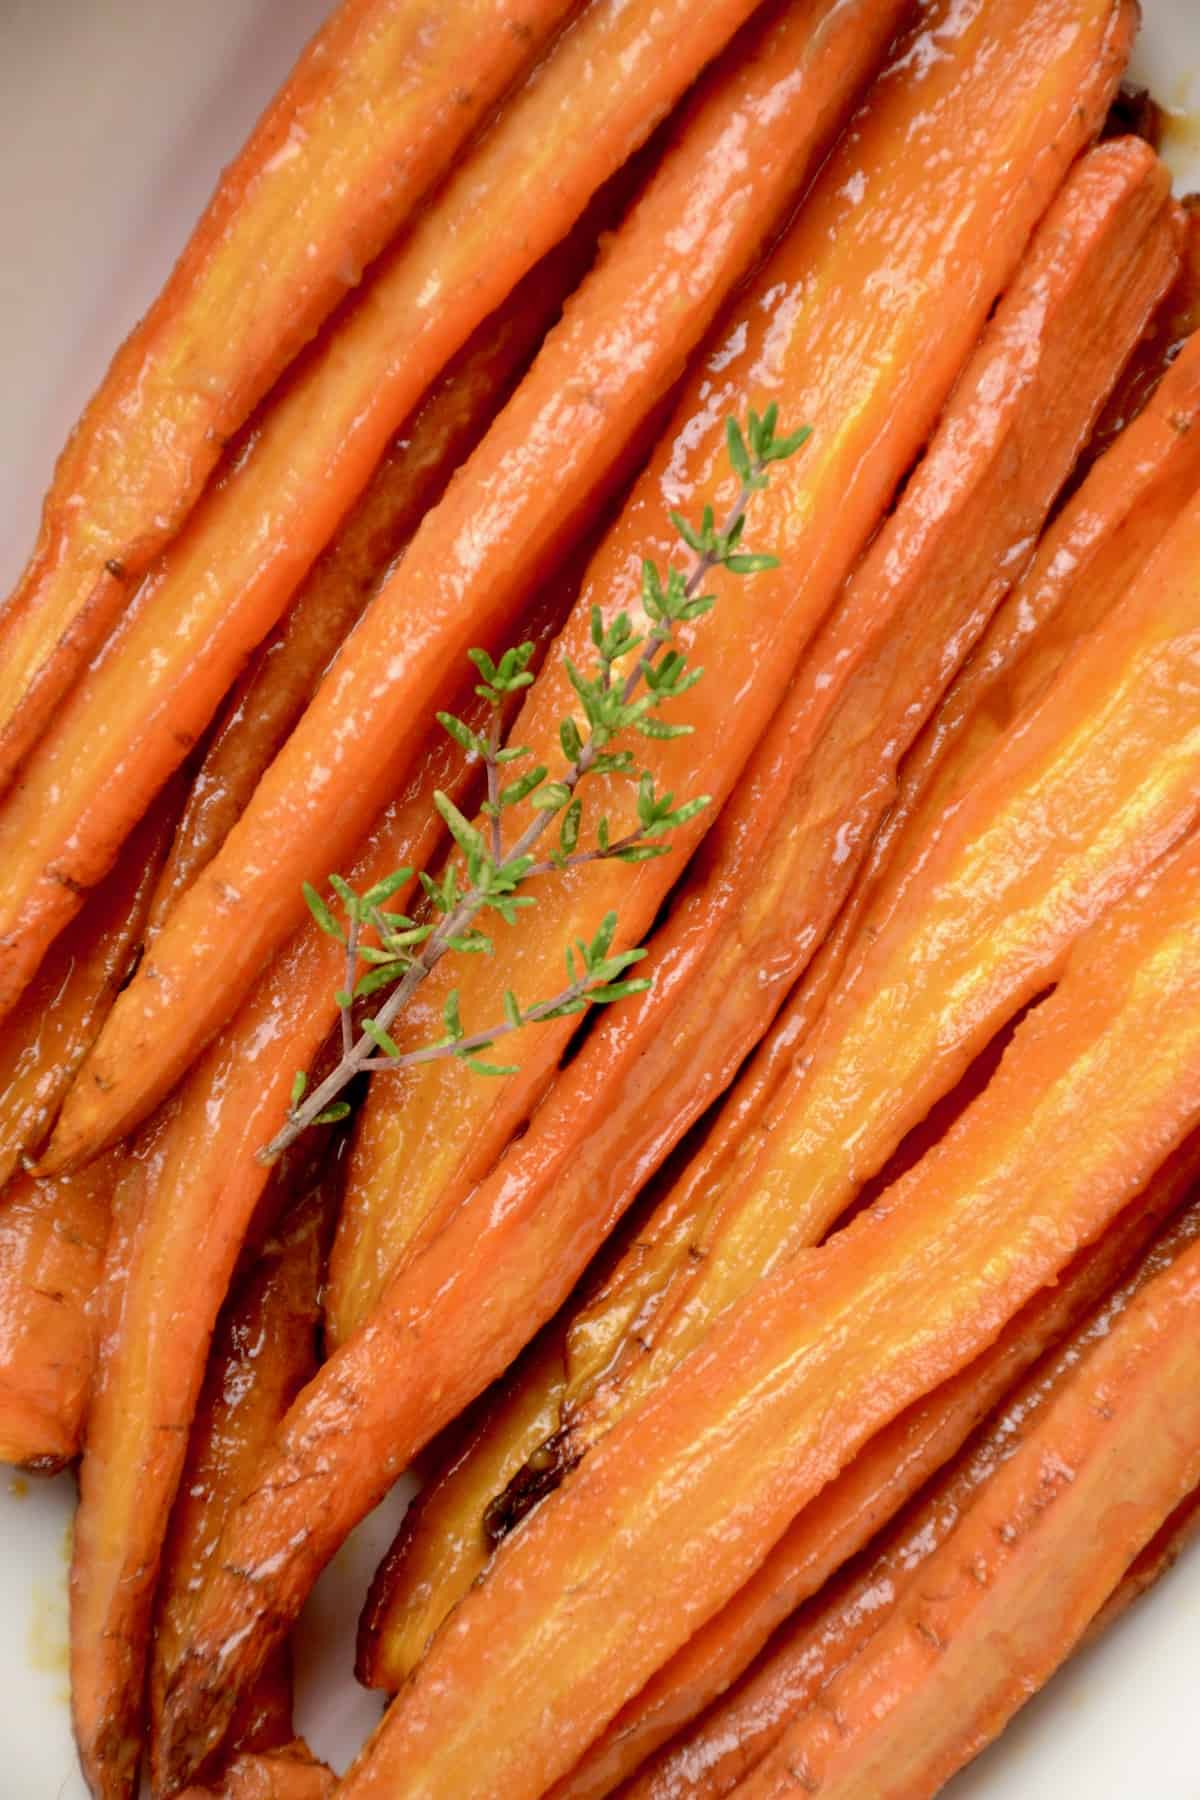 Glazed carrots in a serving dish with a twig of fresh thyme.